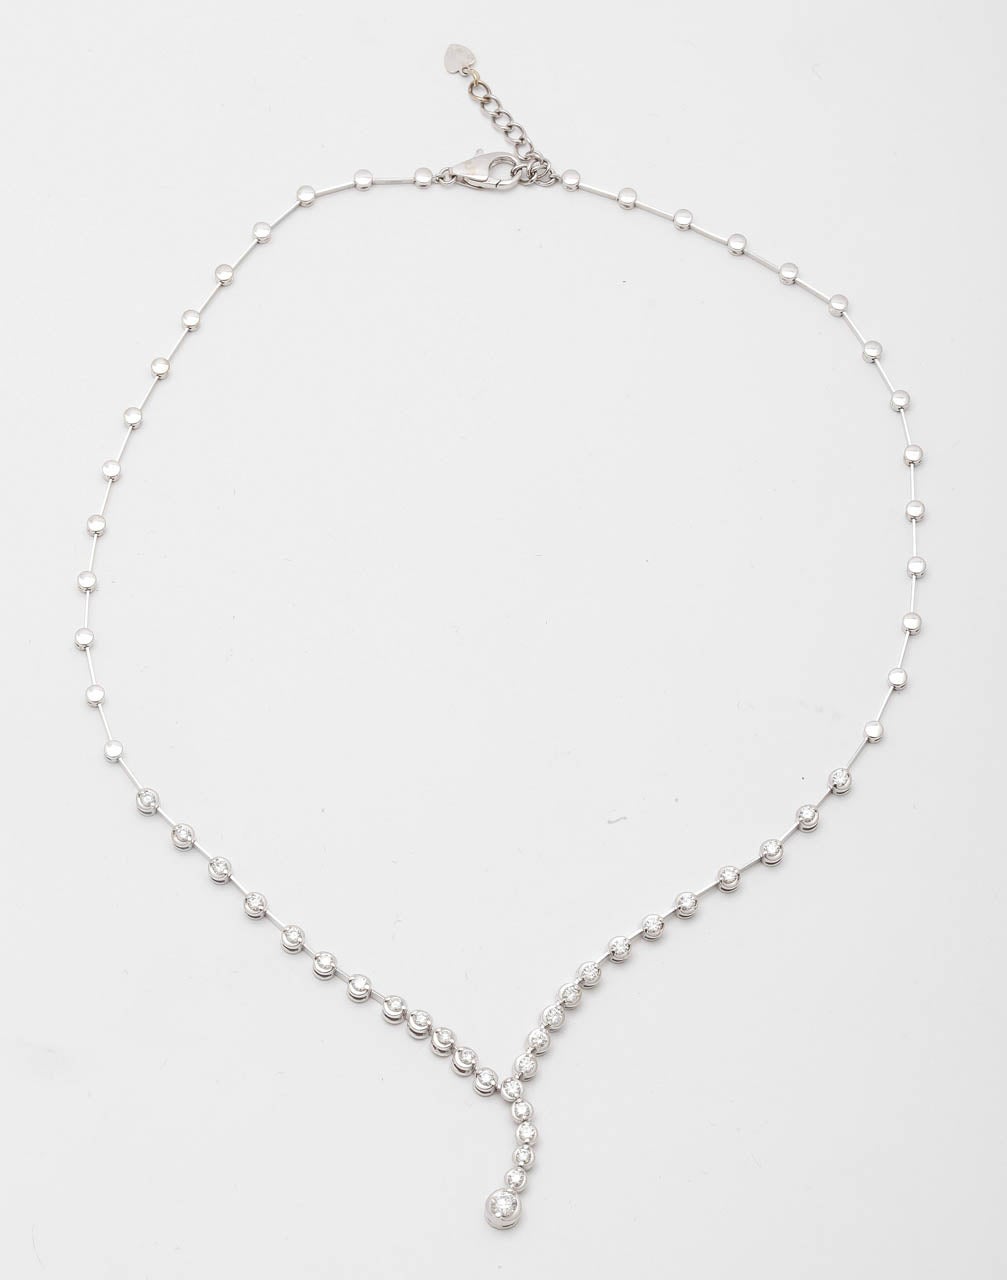 A white gold diamond necklace decorated to the front with 30 brilliant-cut diamonds with a total diamond weight of 1.60 carats.

All our prices are exclusive of VAT.